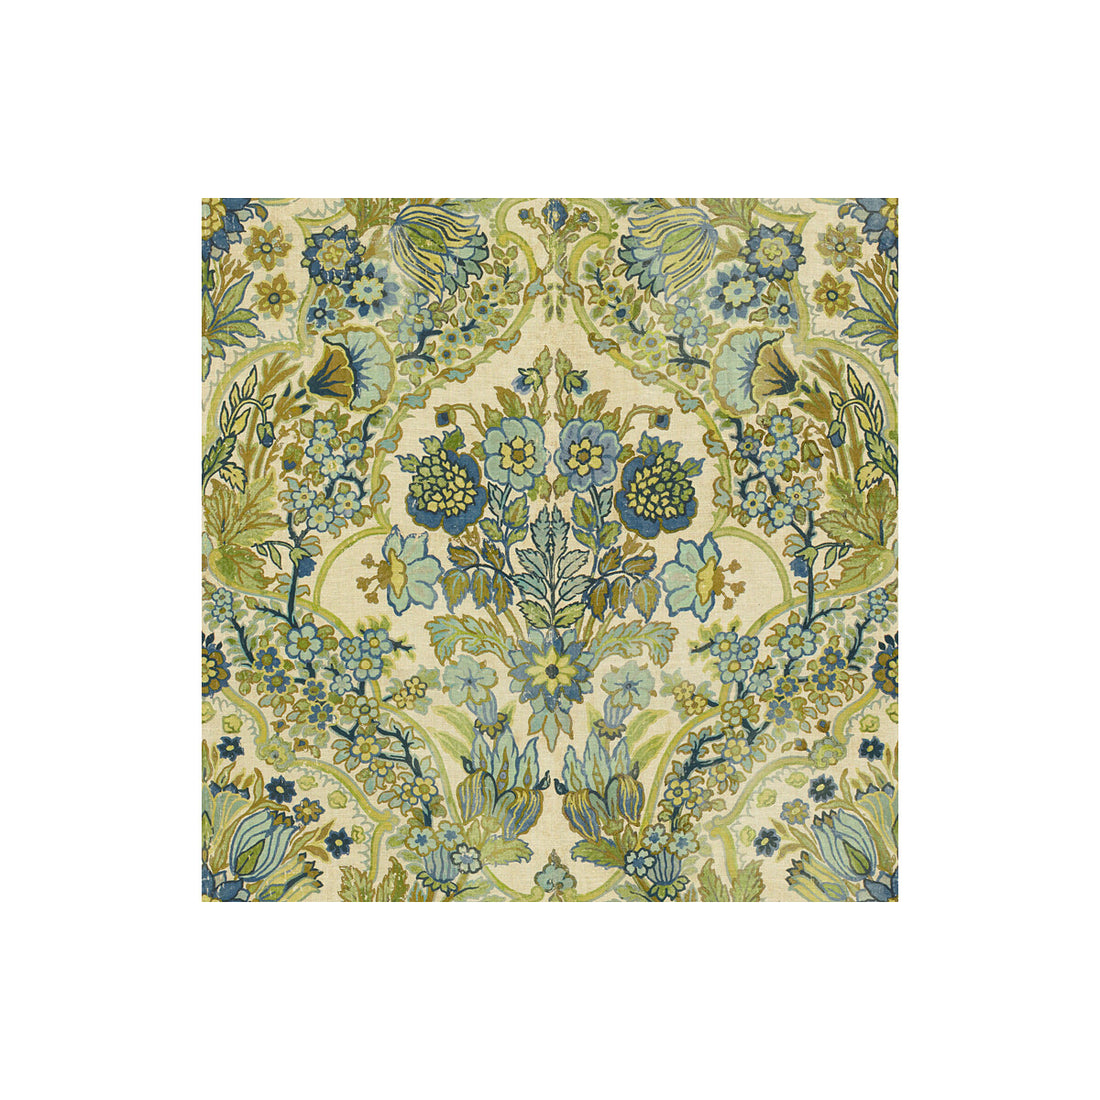 Tetbury fabric in blue/green color - pattern 2013134.513.0 - by Lee Jofa in the Royal Oak Anniversary collection